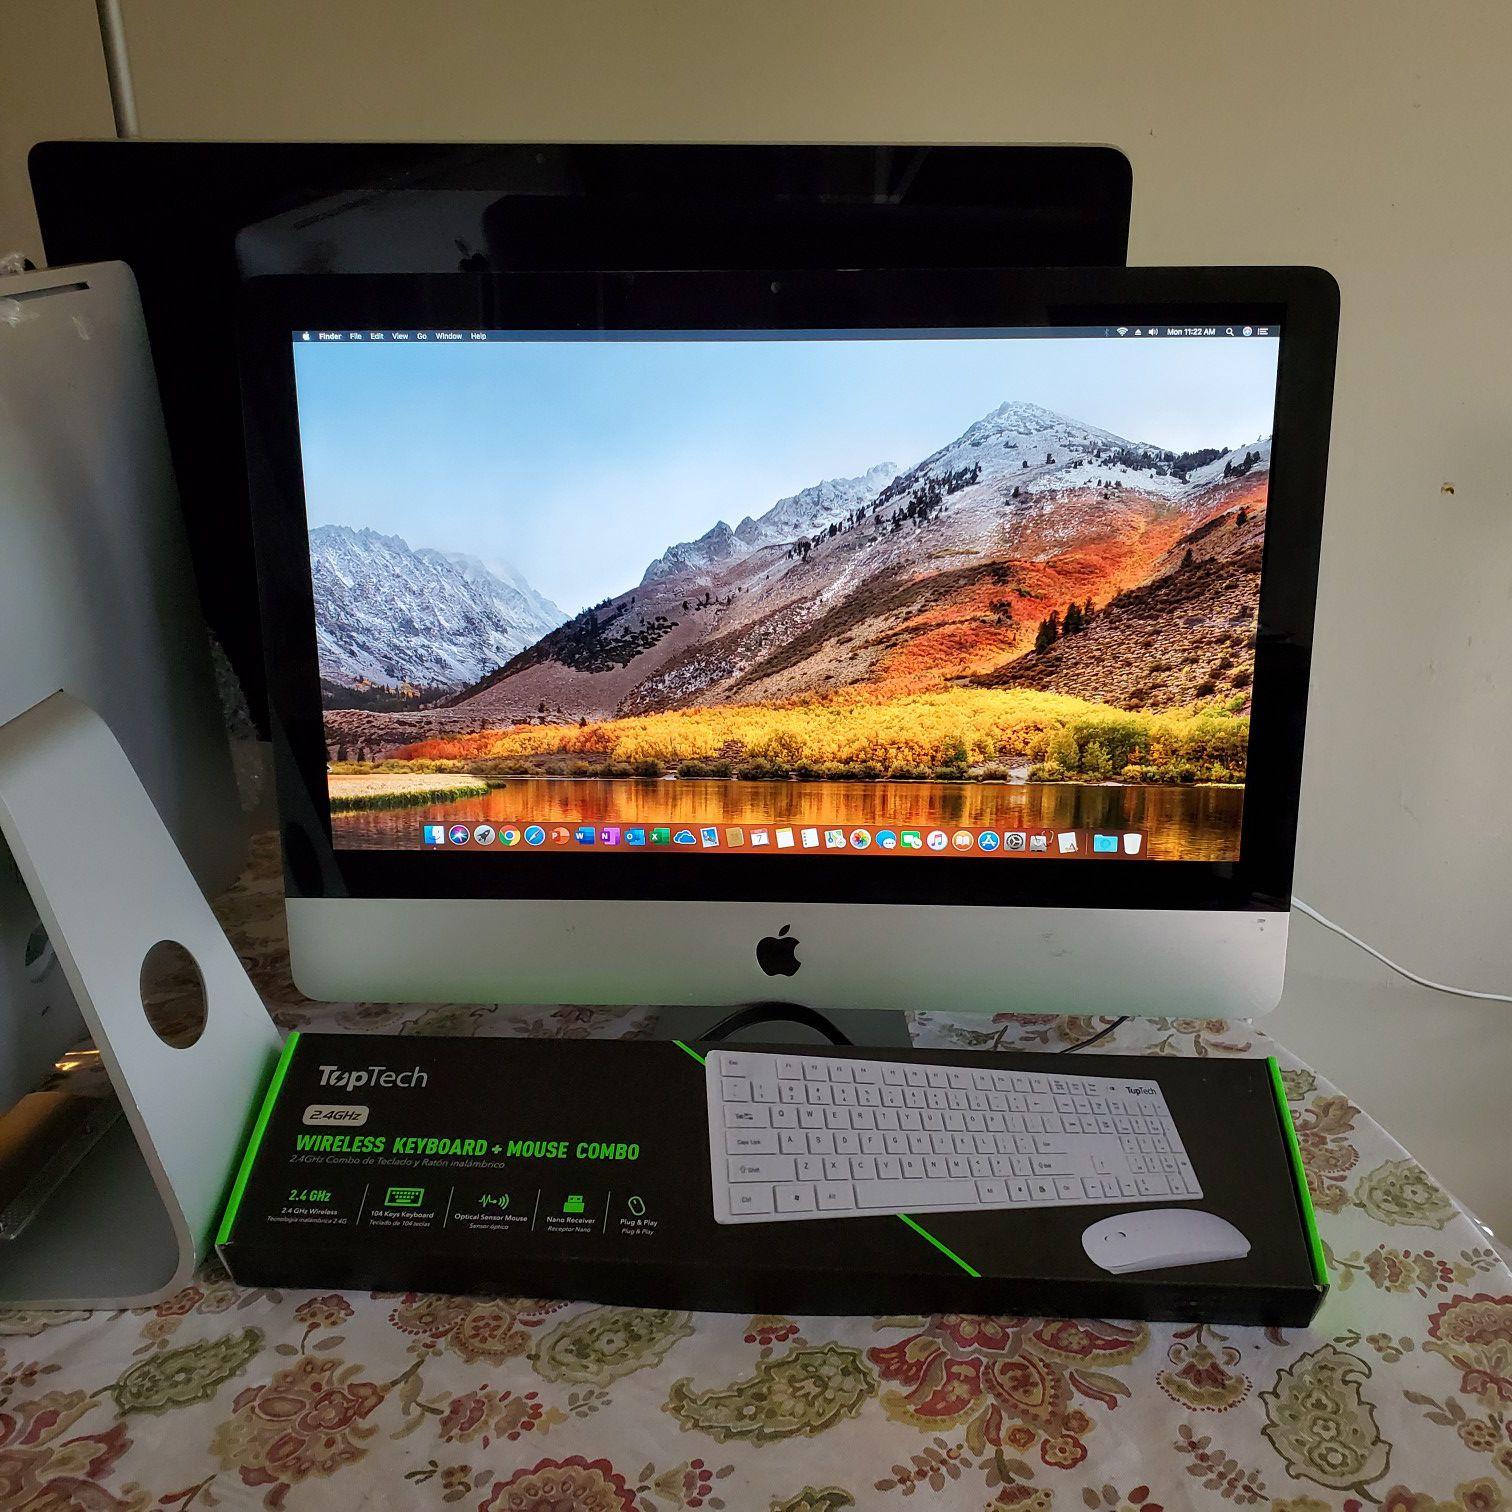 iMac 21, 2011, core i5, 8gb ram, 500gb hard drive comes with wireless keyboard and mouse brand new and software office word full. Works perfectly.